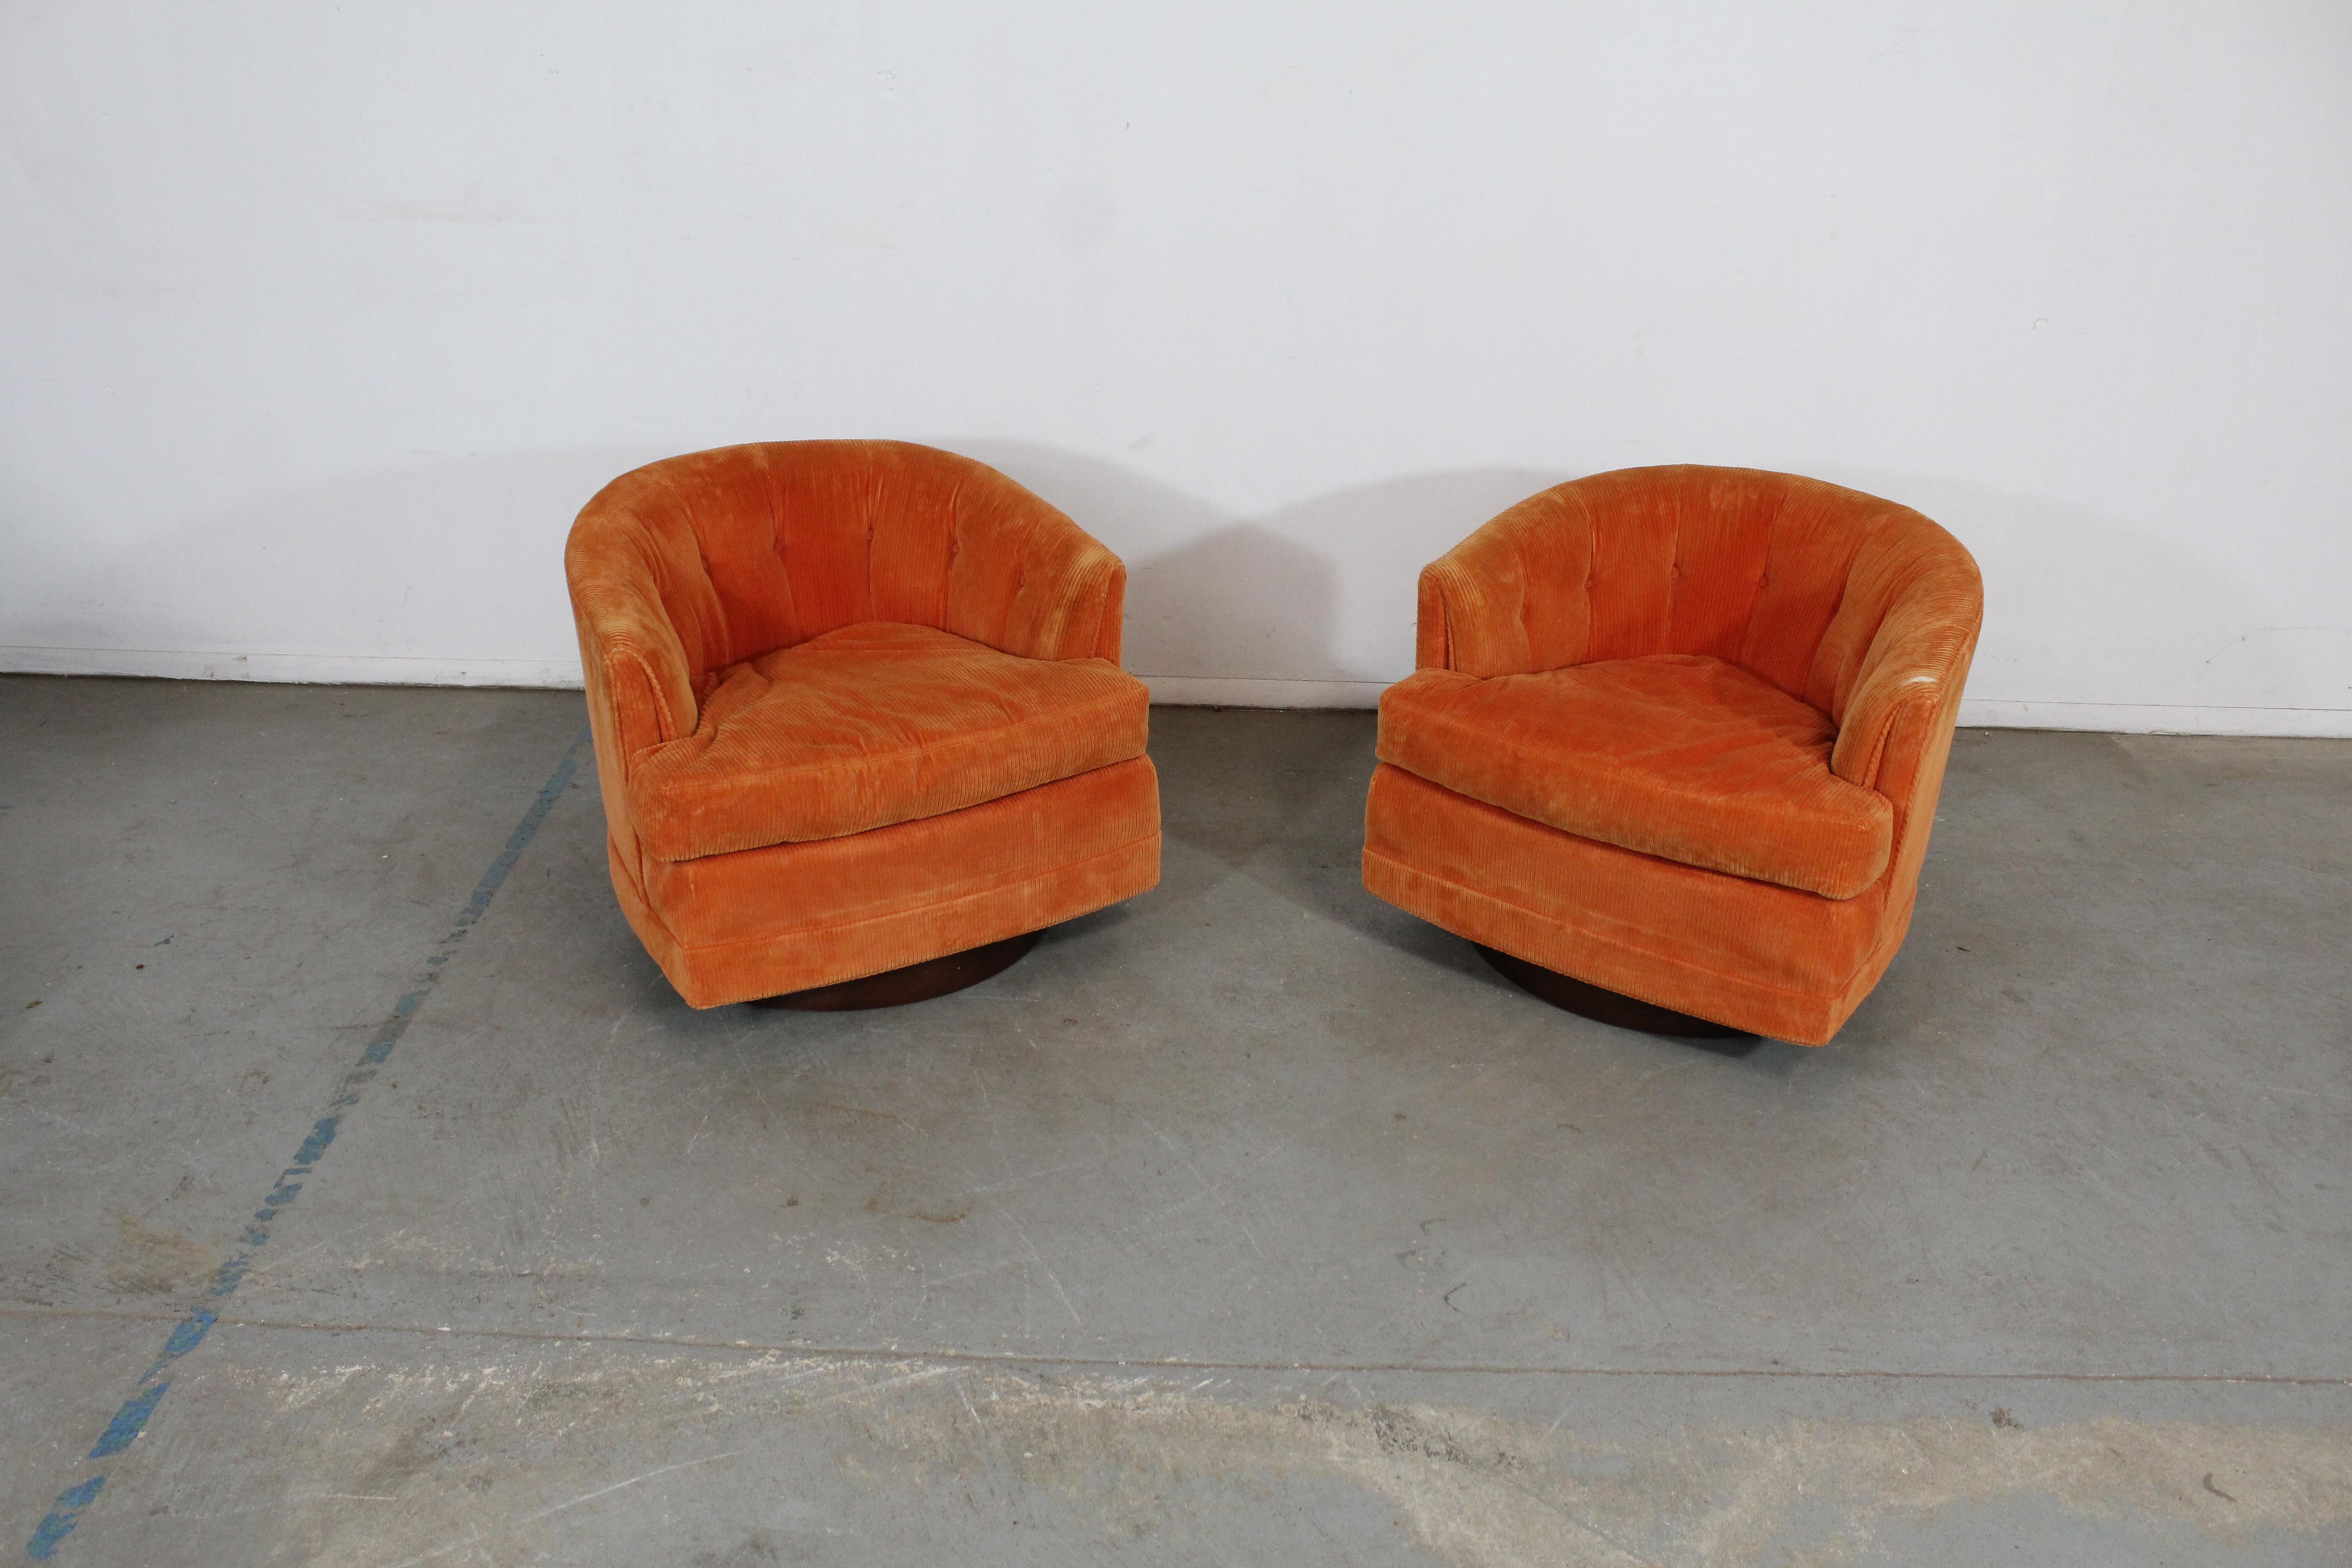 Pair of Mid-Century Modern Barrel back swivel club chairs

Offered is a pair of vintage Mid-Century Modern style swivel chairs by Selig. These chairs have round backs and walnut bases. They are in good condition, but need to be reupholstered with